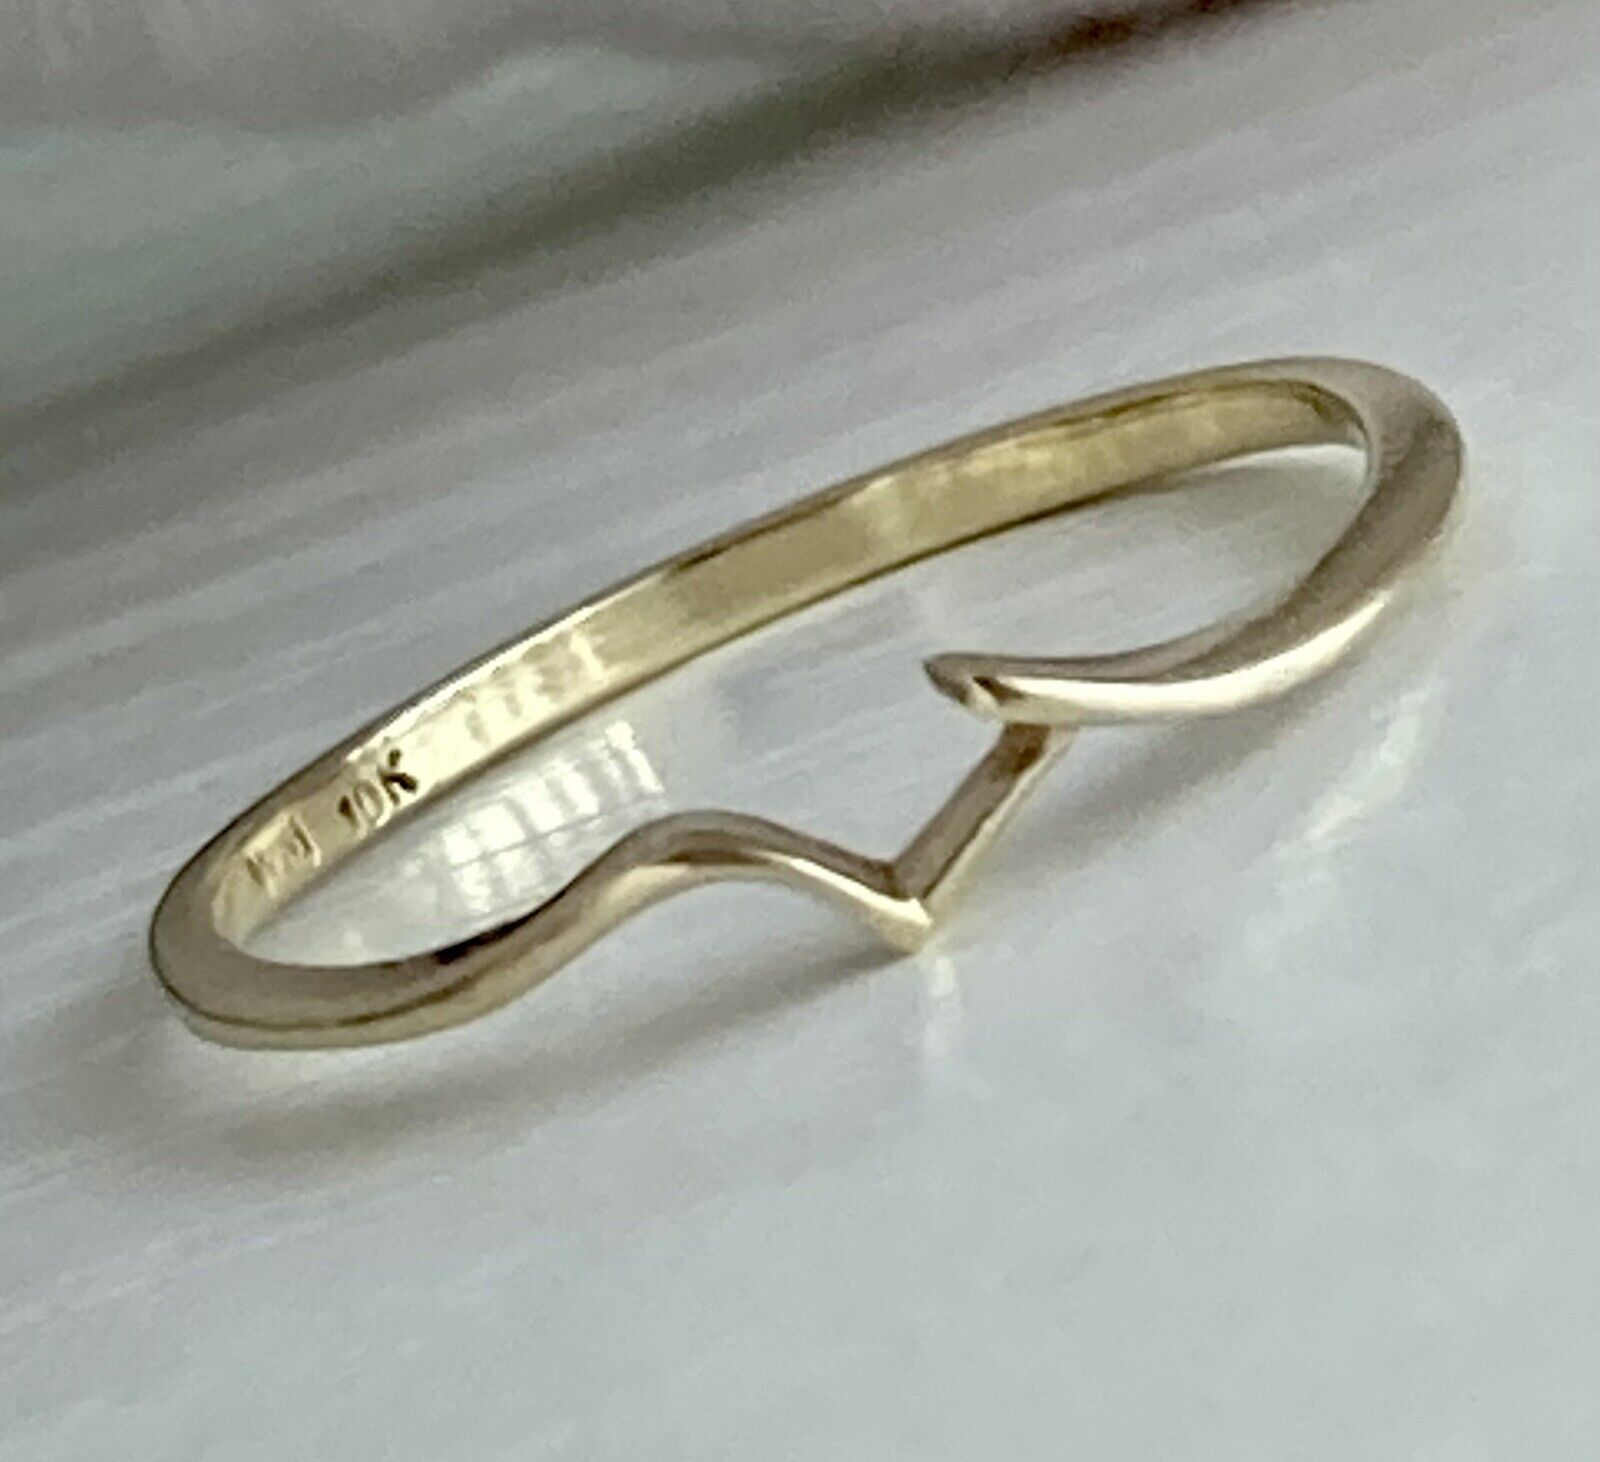 10k Yellow Gold Vintage Modernist Abstract Simple Dainty Ring Band Size 6.5 WM